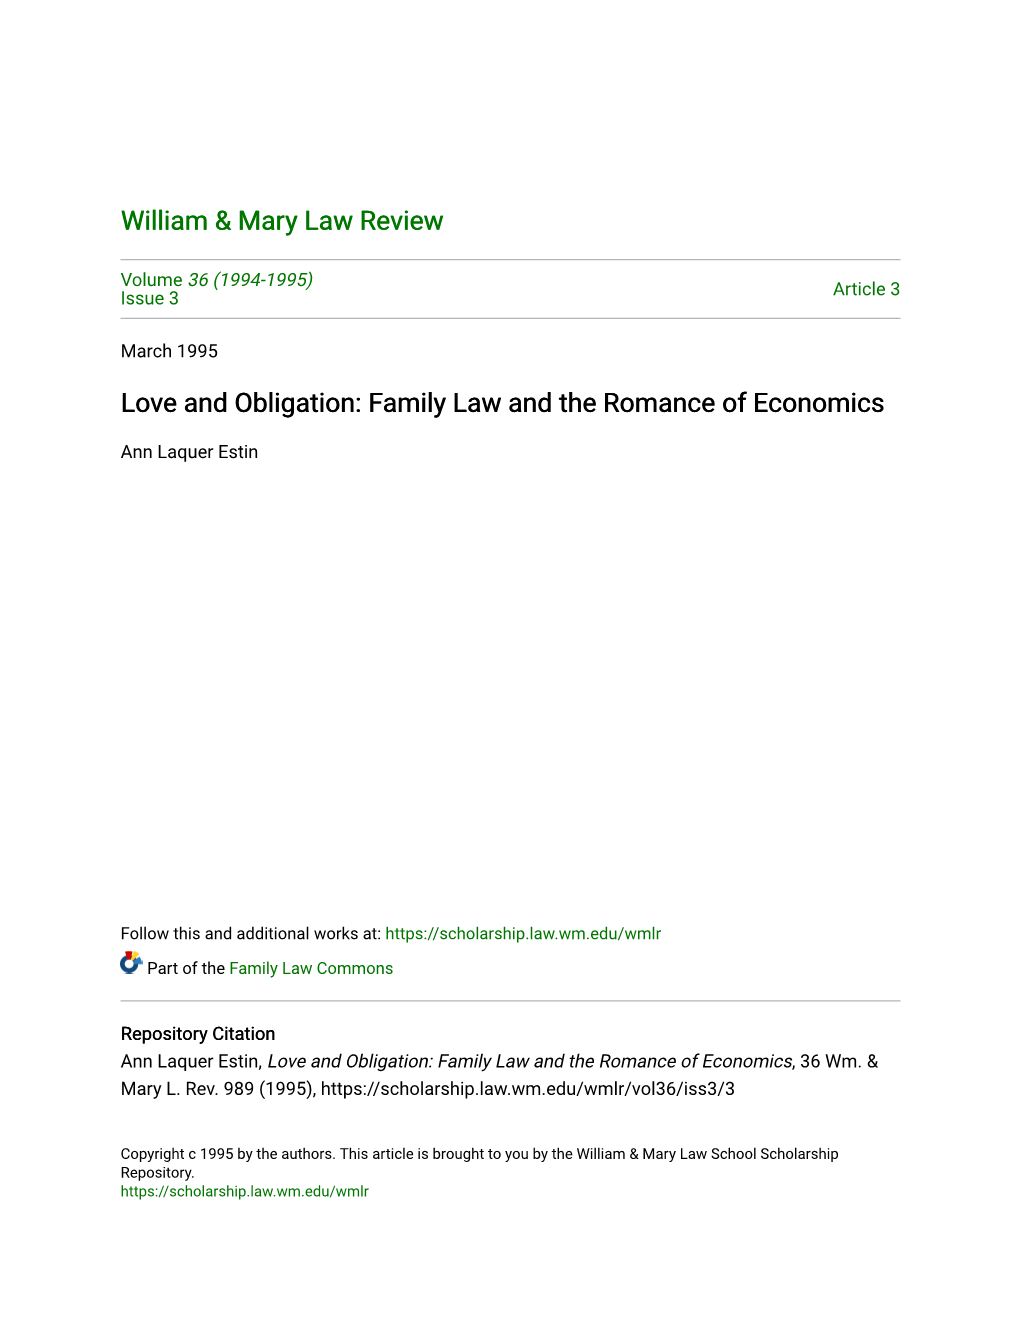 Love and Obligation: Family Law and the Romance of Economics